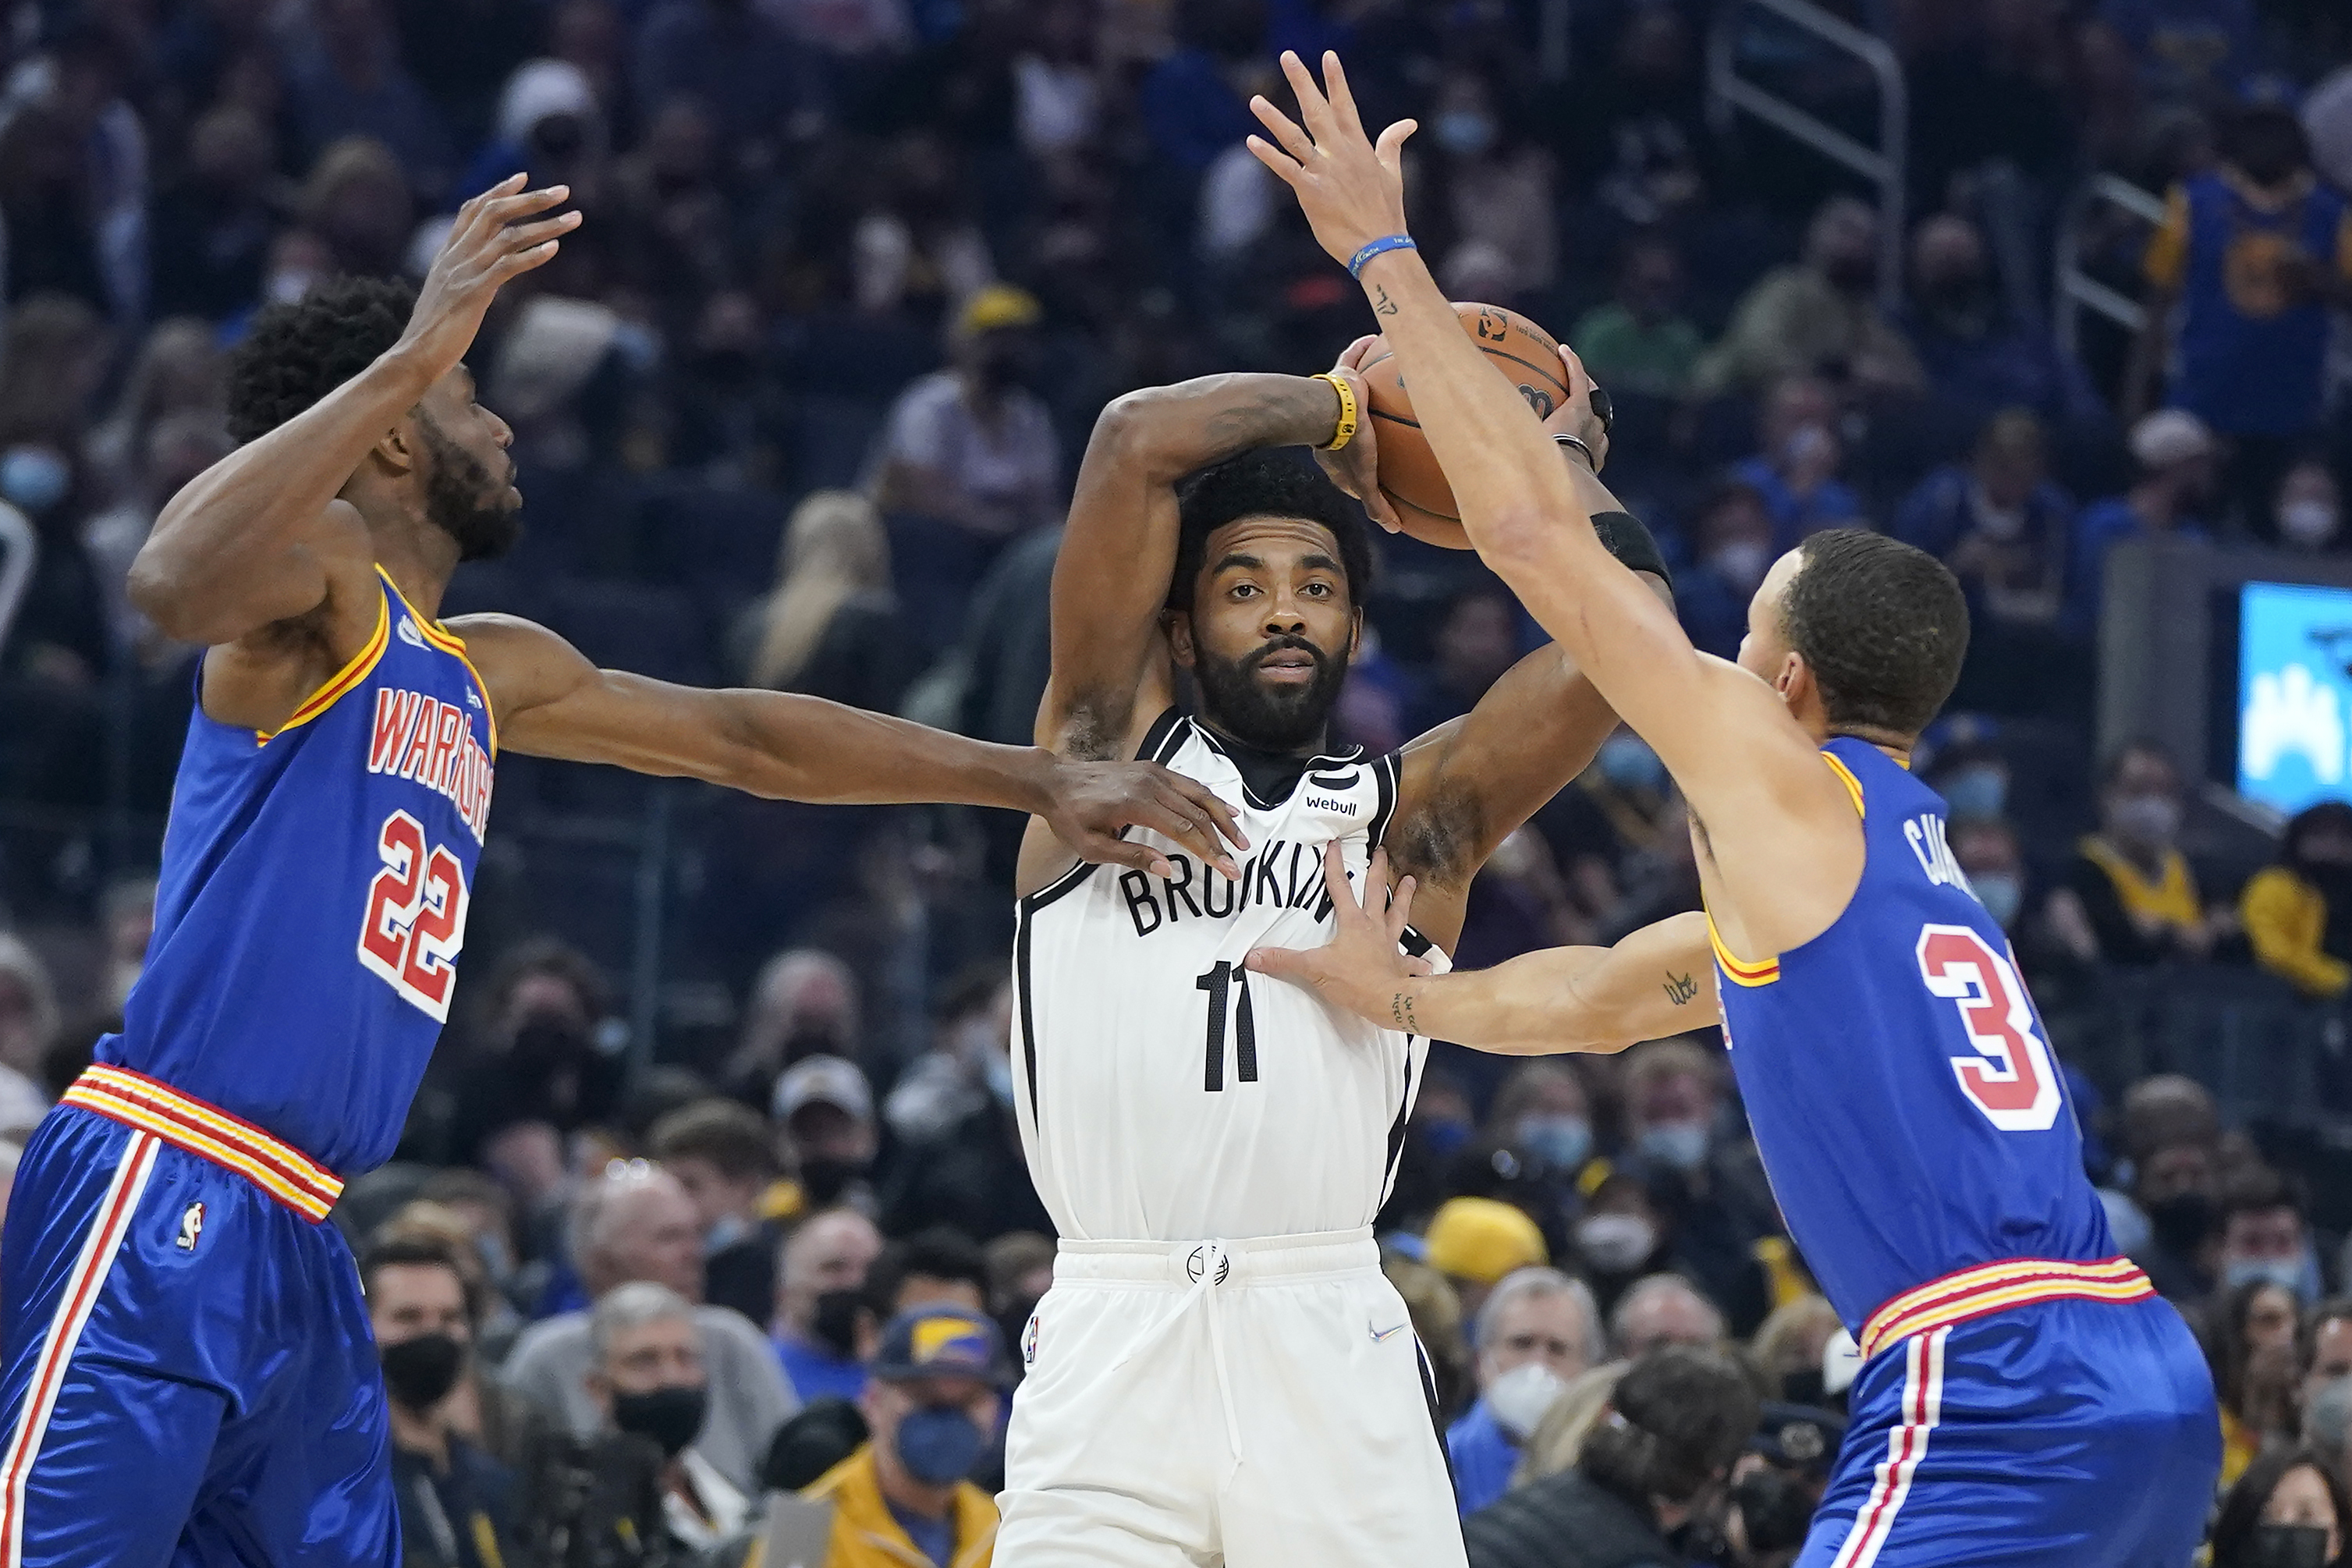 Brooklyn Nets Bench Kyrie Irving Over Vaccination Status